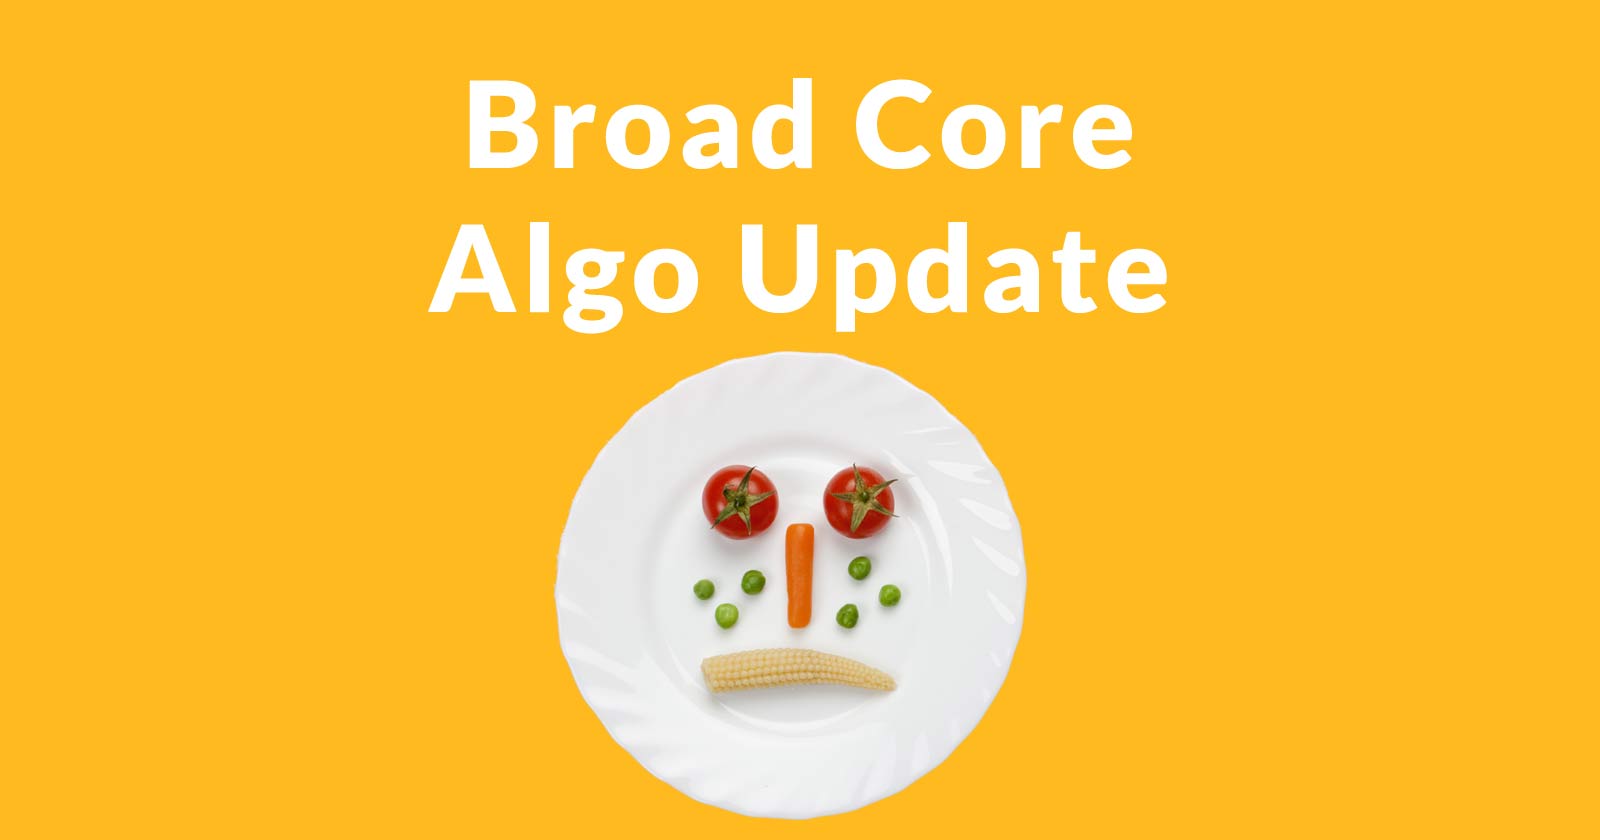 Image of a plate of food with the words Broad Core Algo Update written above it.